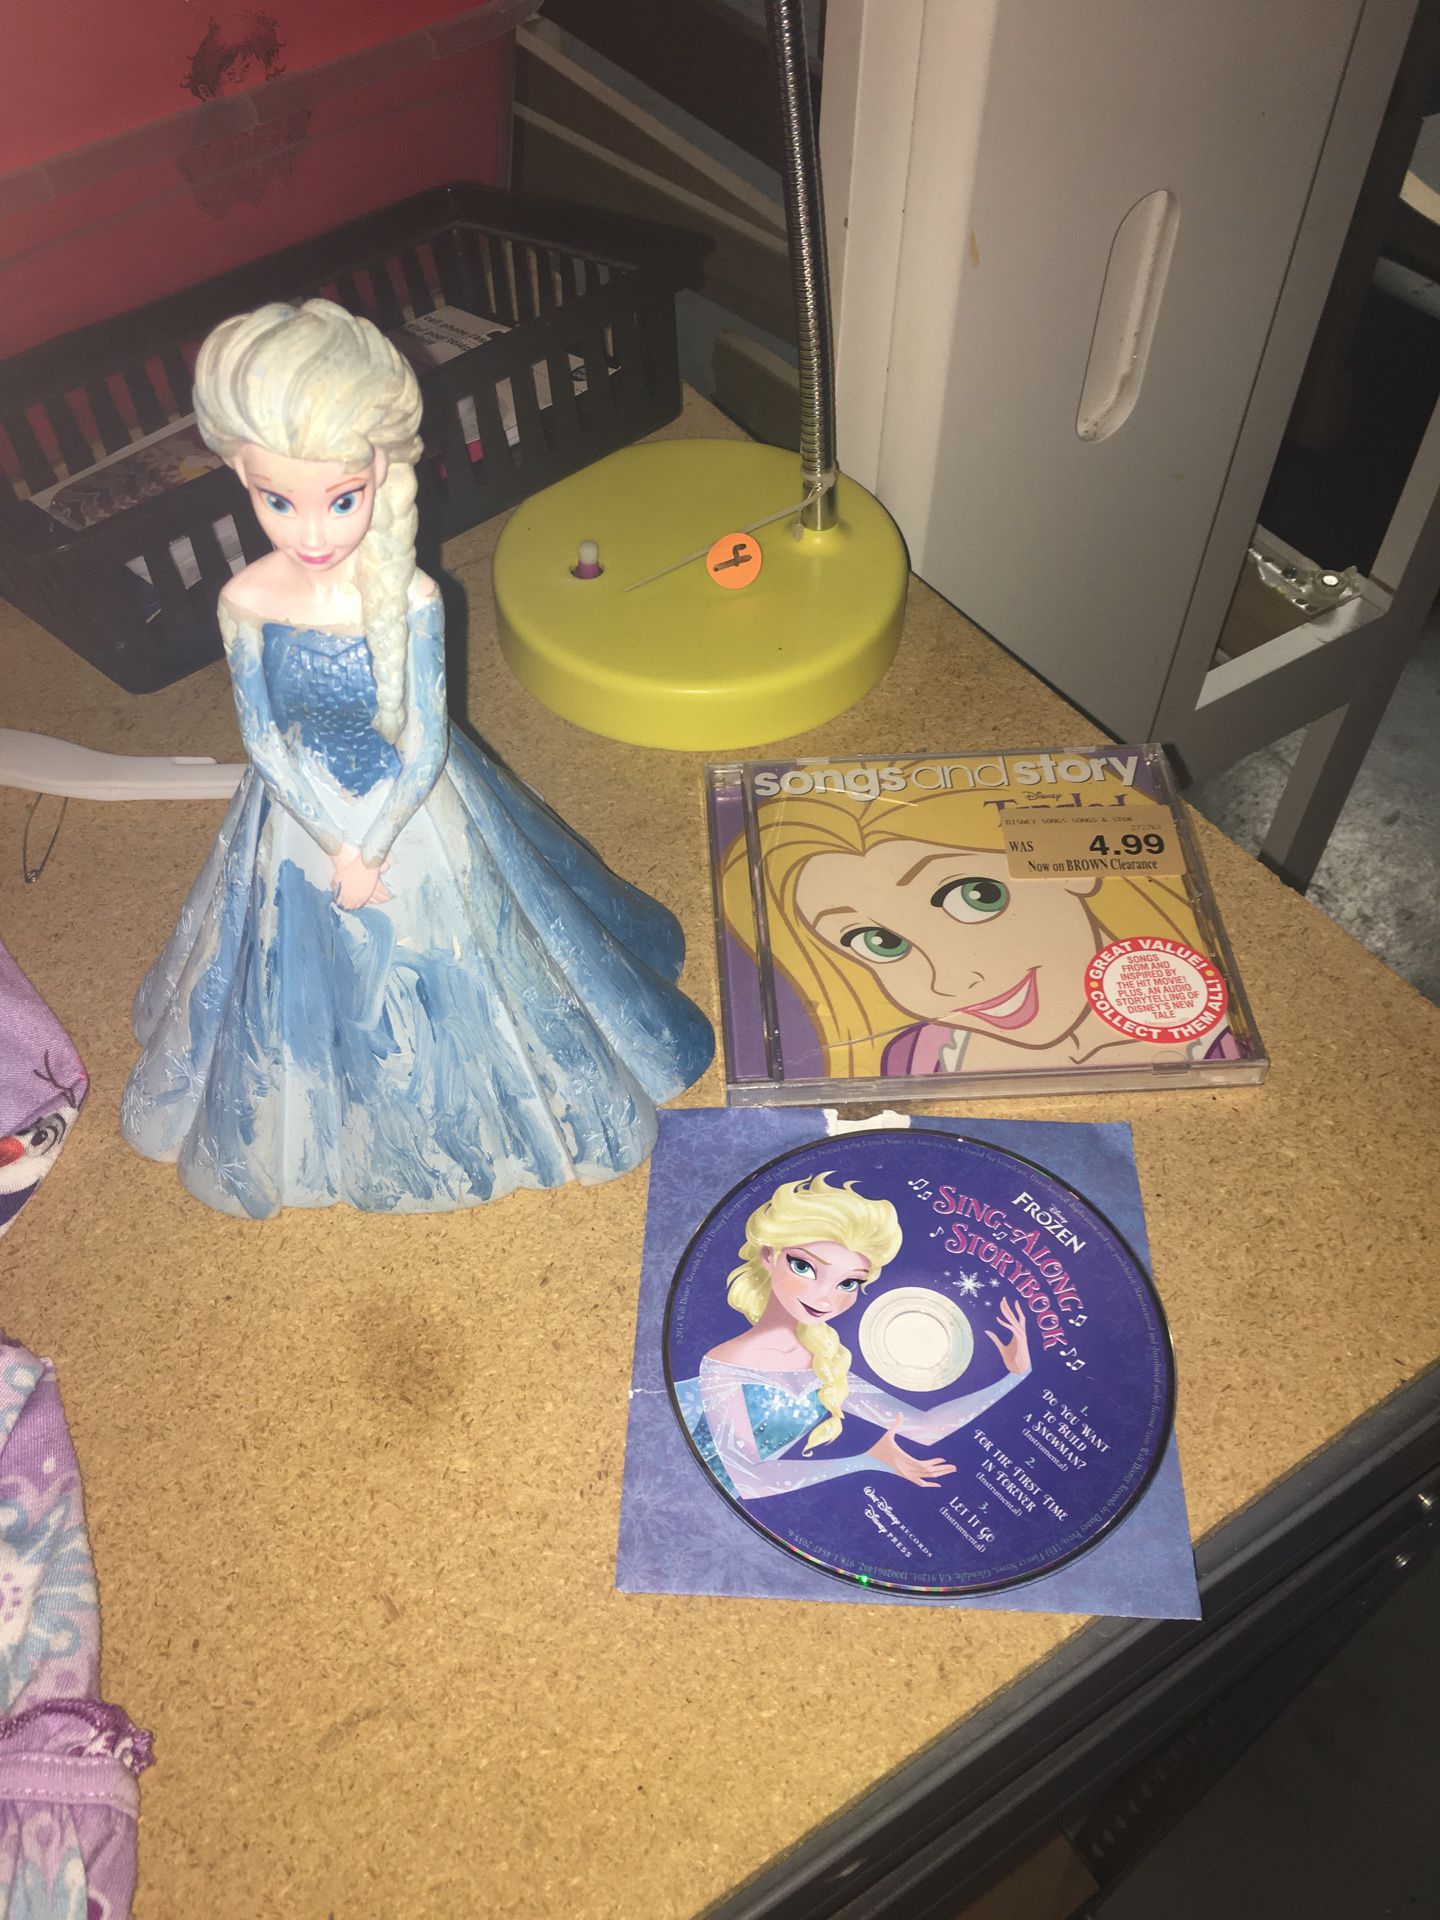 DISNEY FROZEN ❄️ Elsa piggy bank and two cds 💿❄️ one is song and story and the other is a song a long story book!!! ❄️❄️❄️❄️